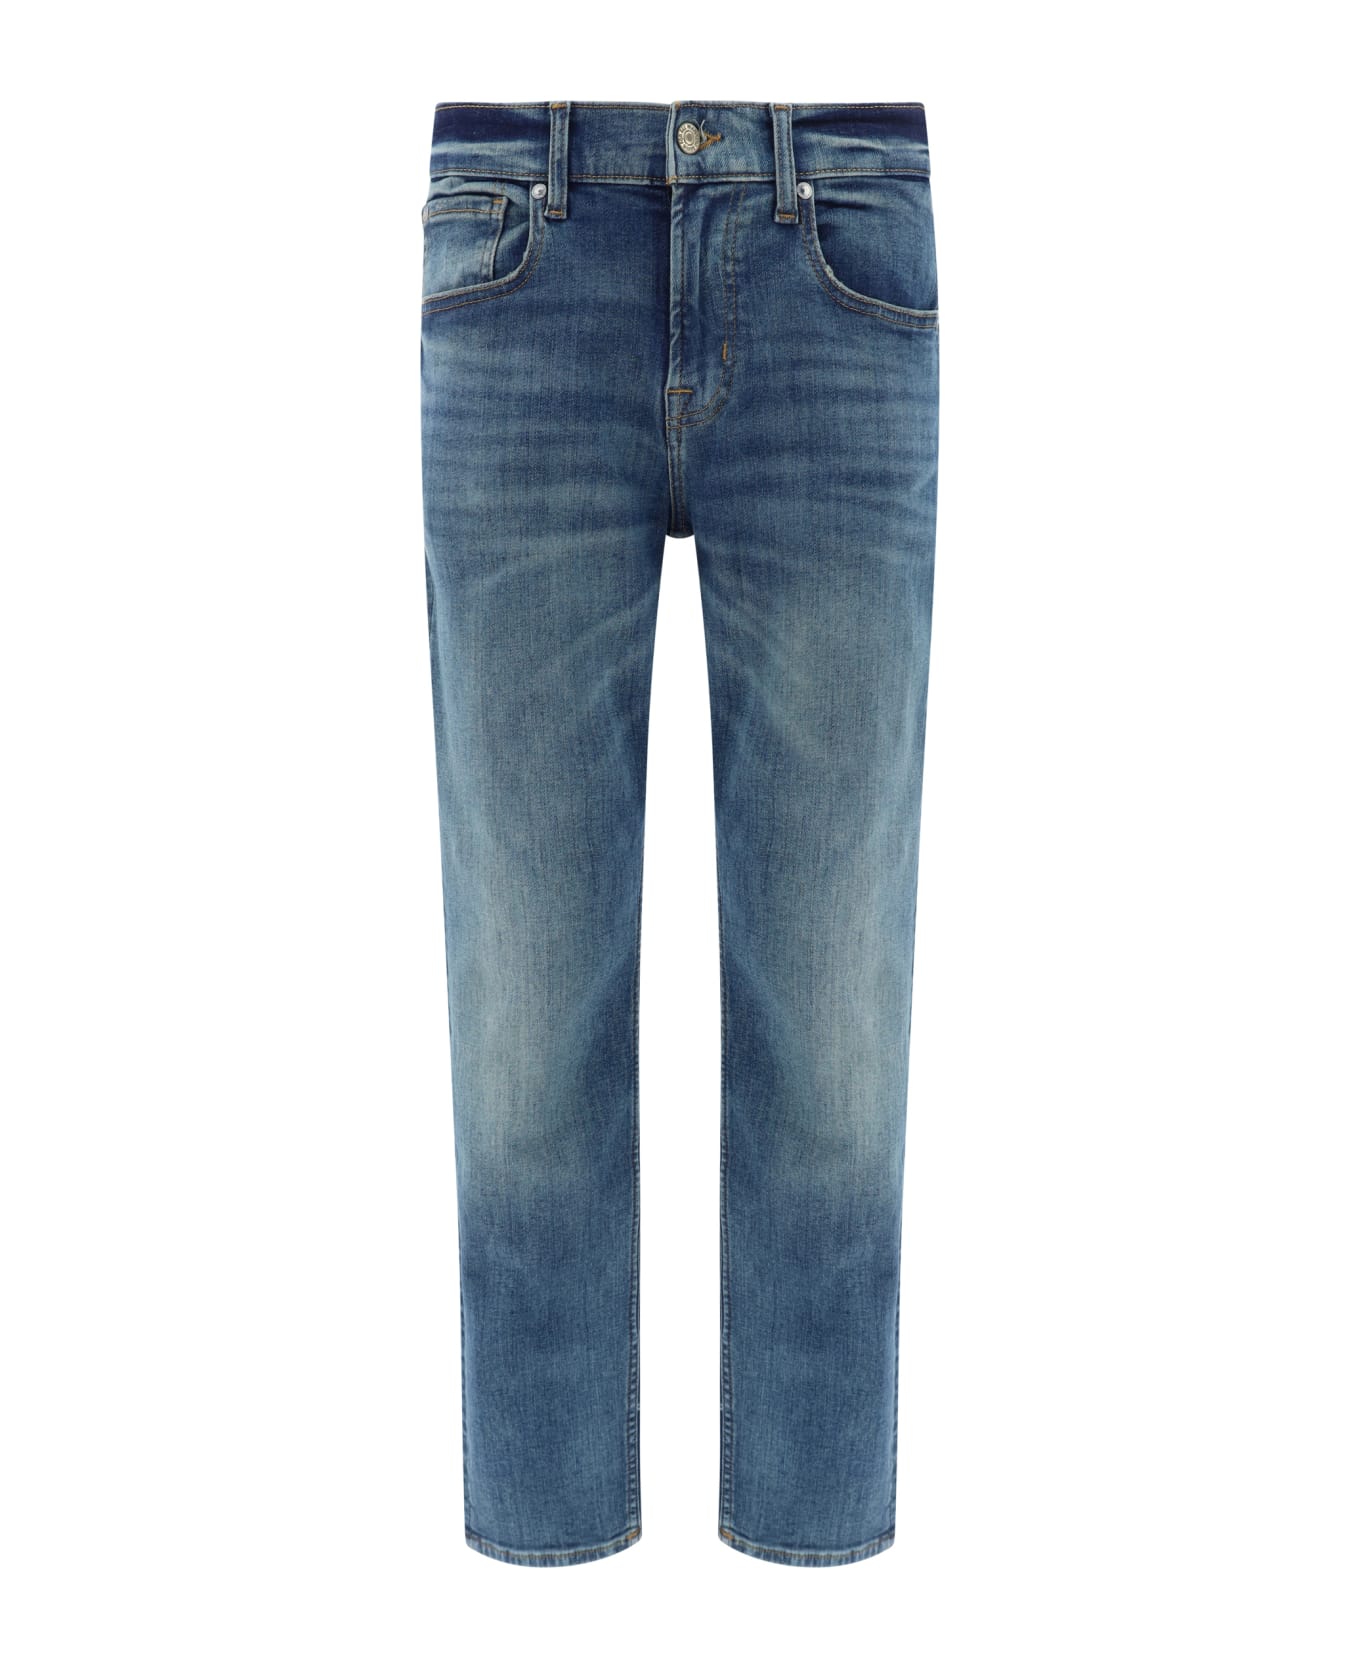 7 For All Mankind Jeans - Mid Blue デニム